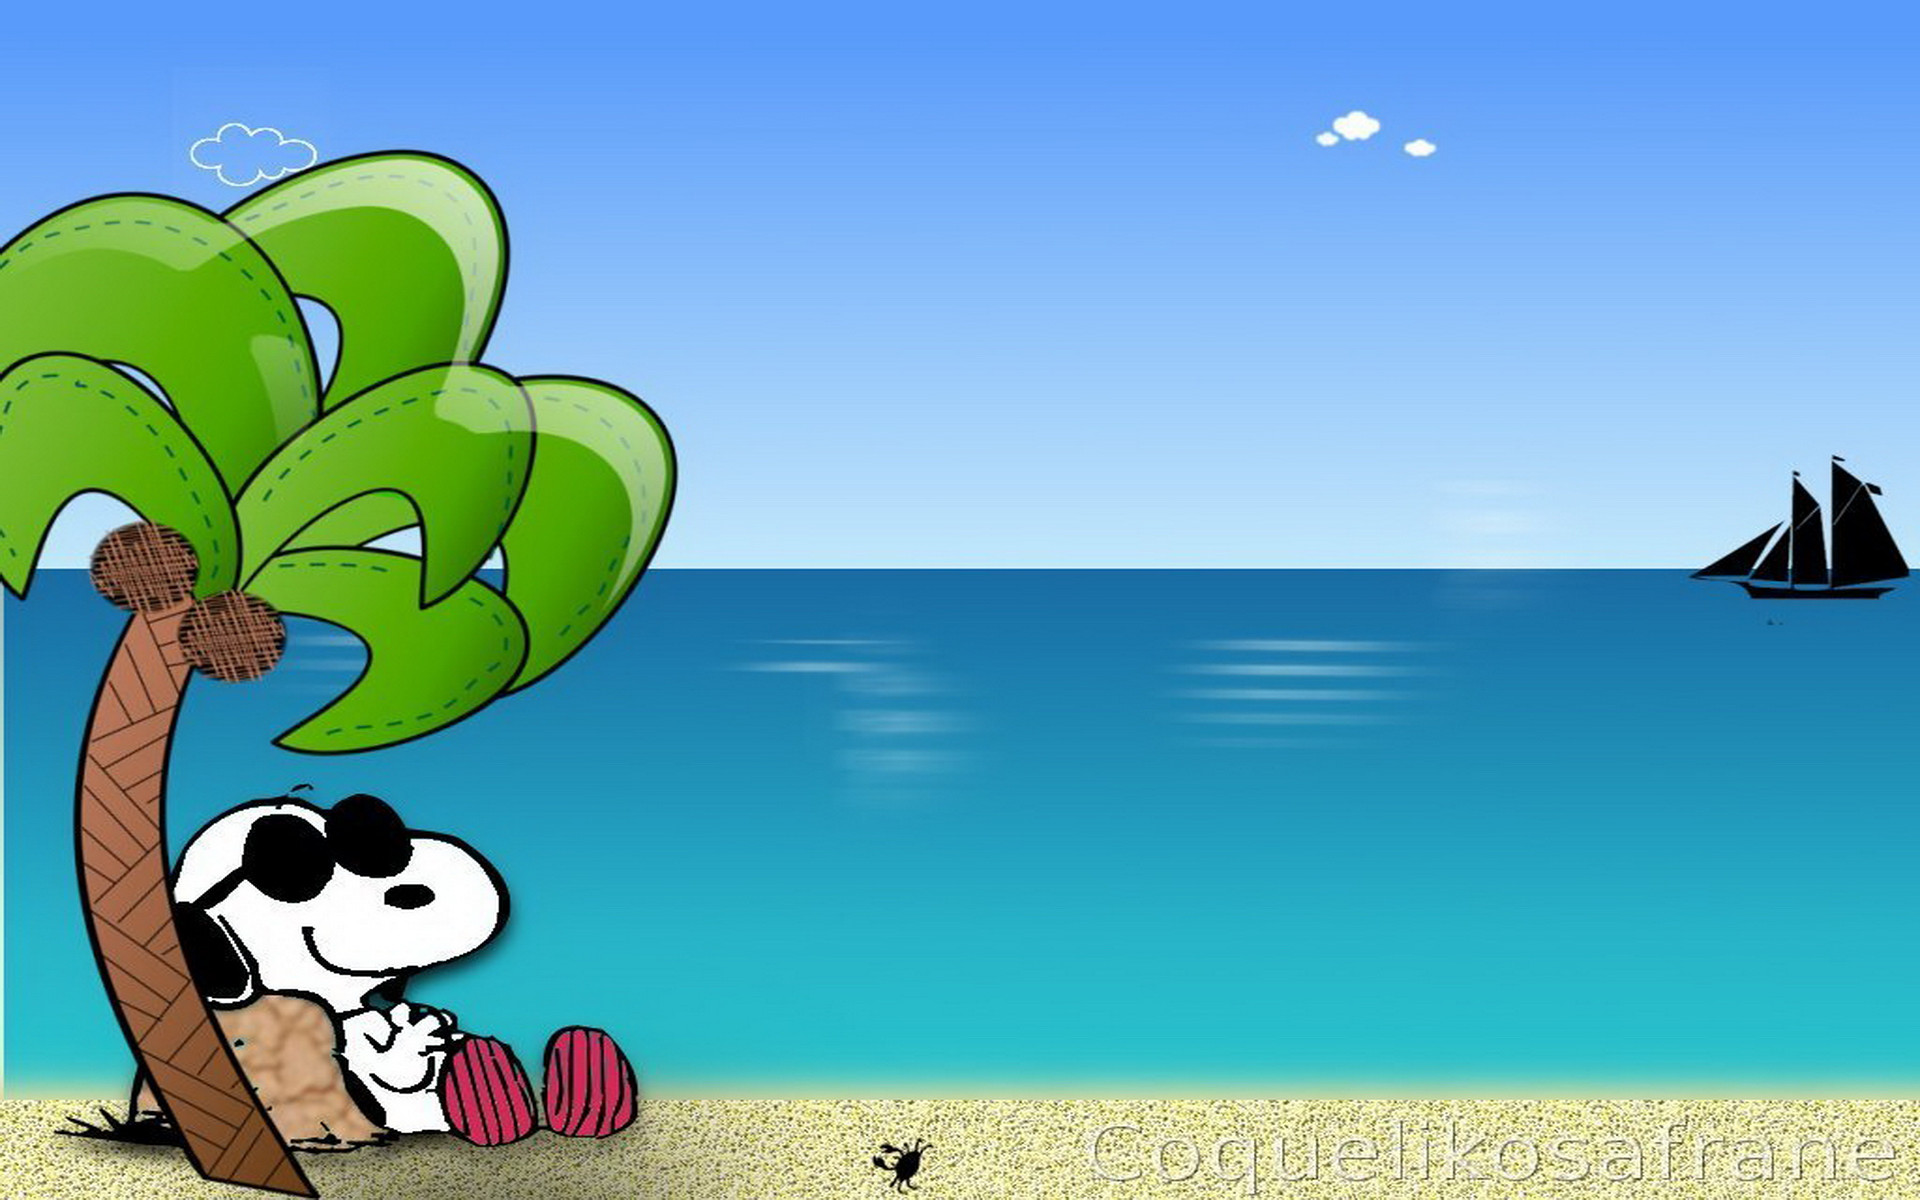 HD Image Snoopy Collection